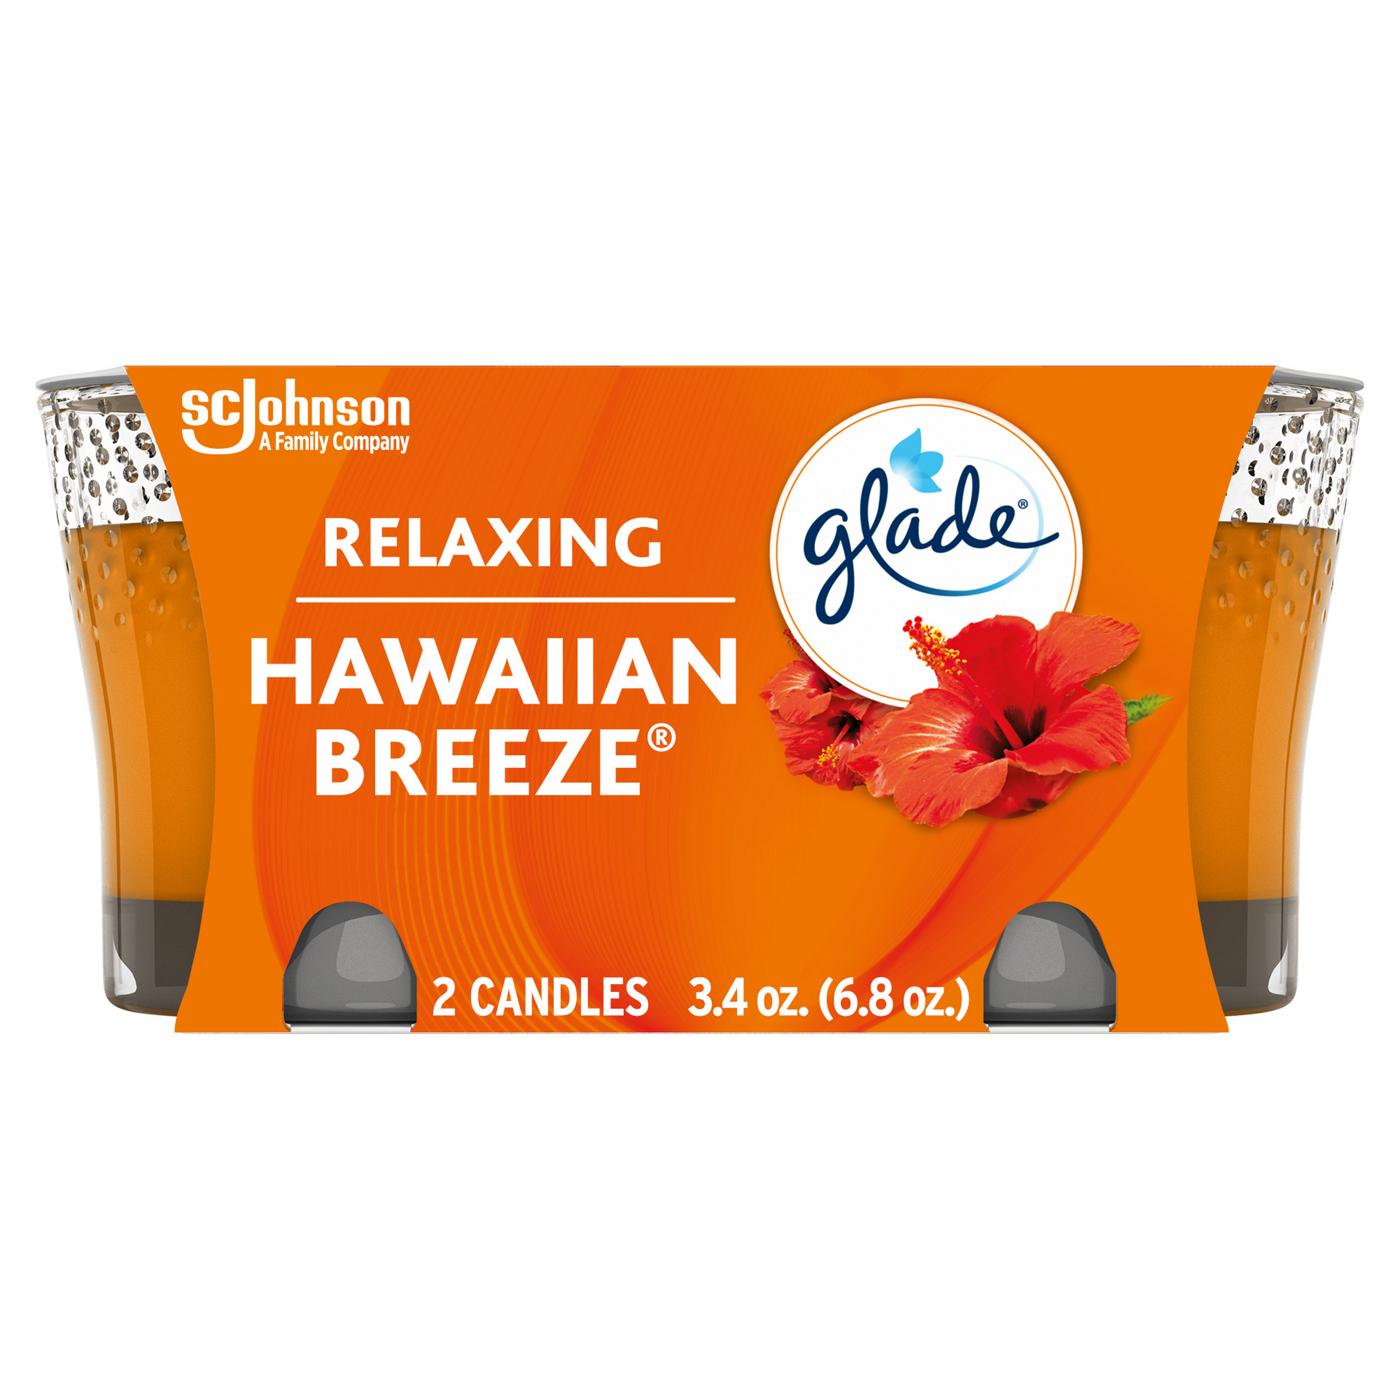 Glade Hawaiian Breeze Candle Value Pack; image 1 of 2